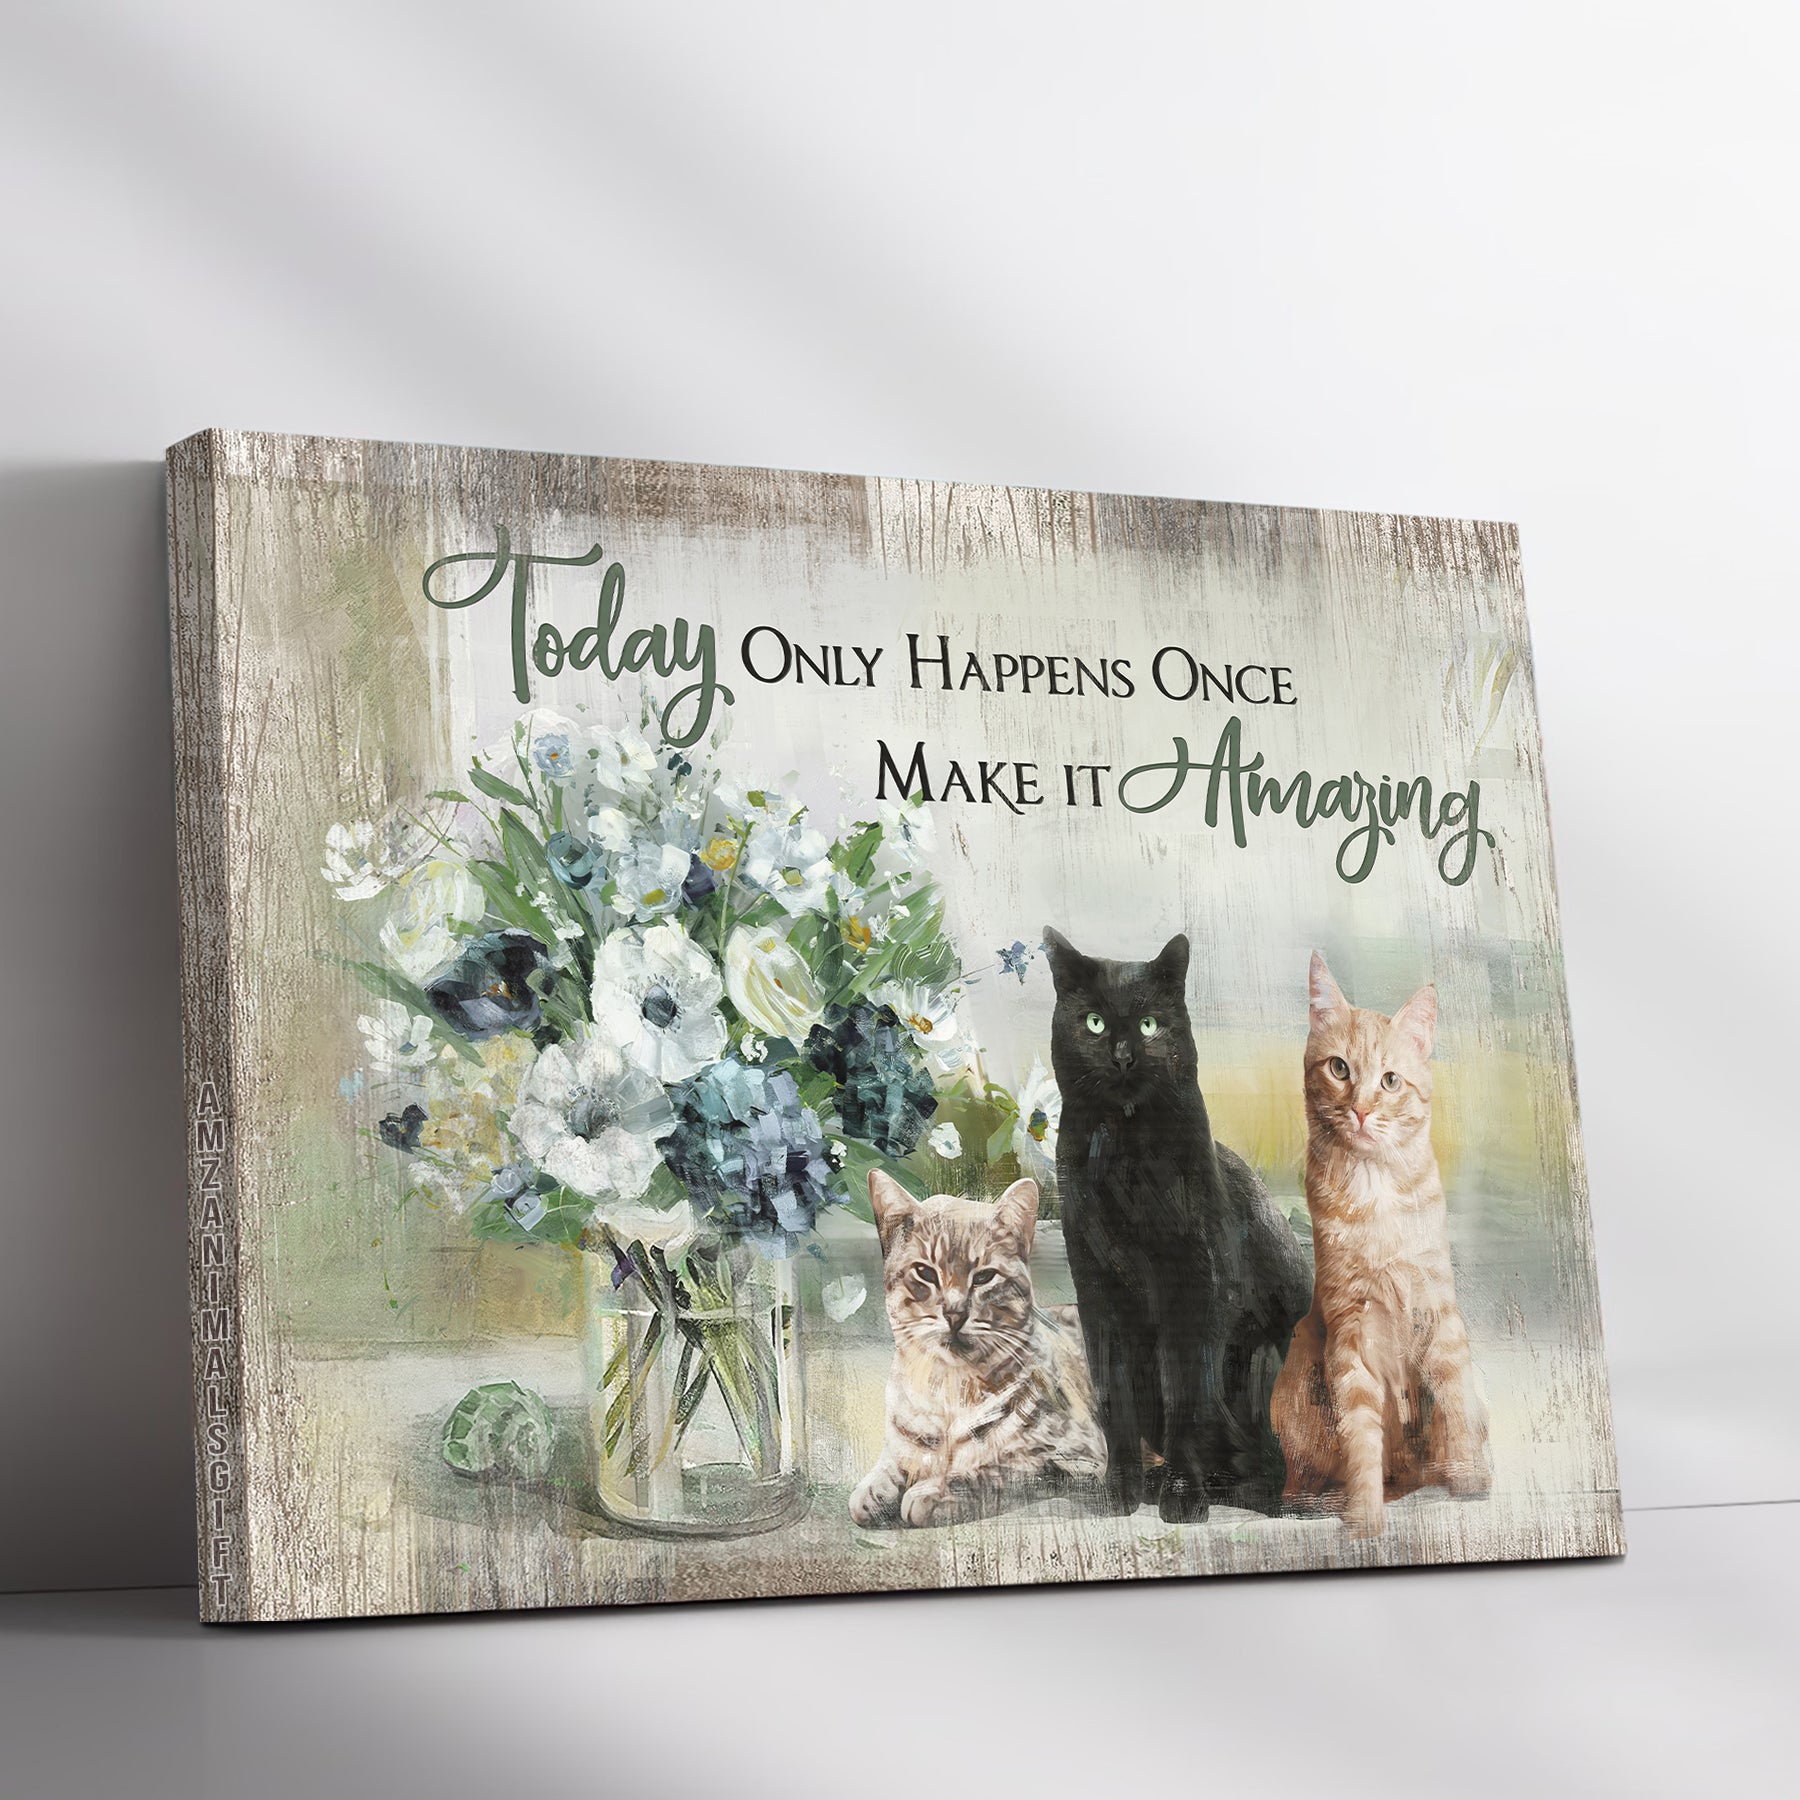 Cat & Jesus Premium Wrapped Landscape Canvas - Adorable Cats, Flower Vase, Today Only Happens Once Make It Amazing - Perfect Gift For Christian